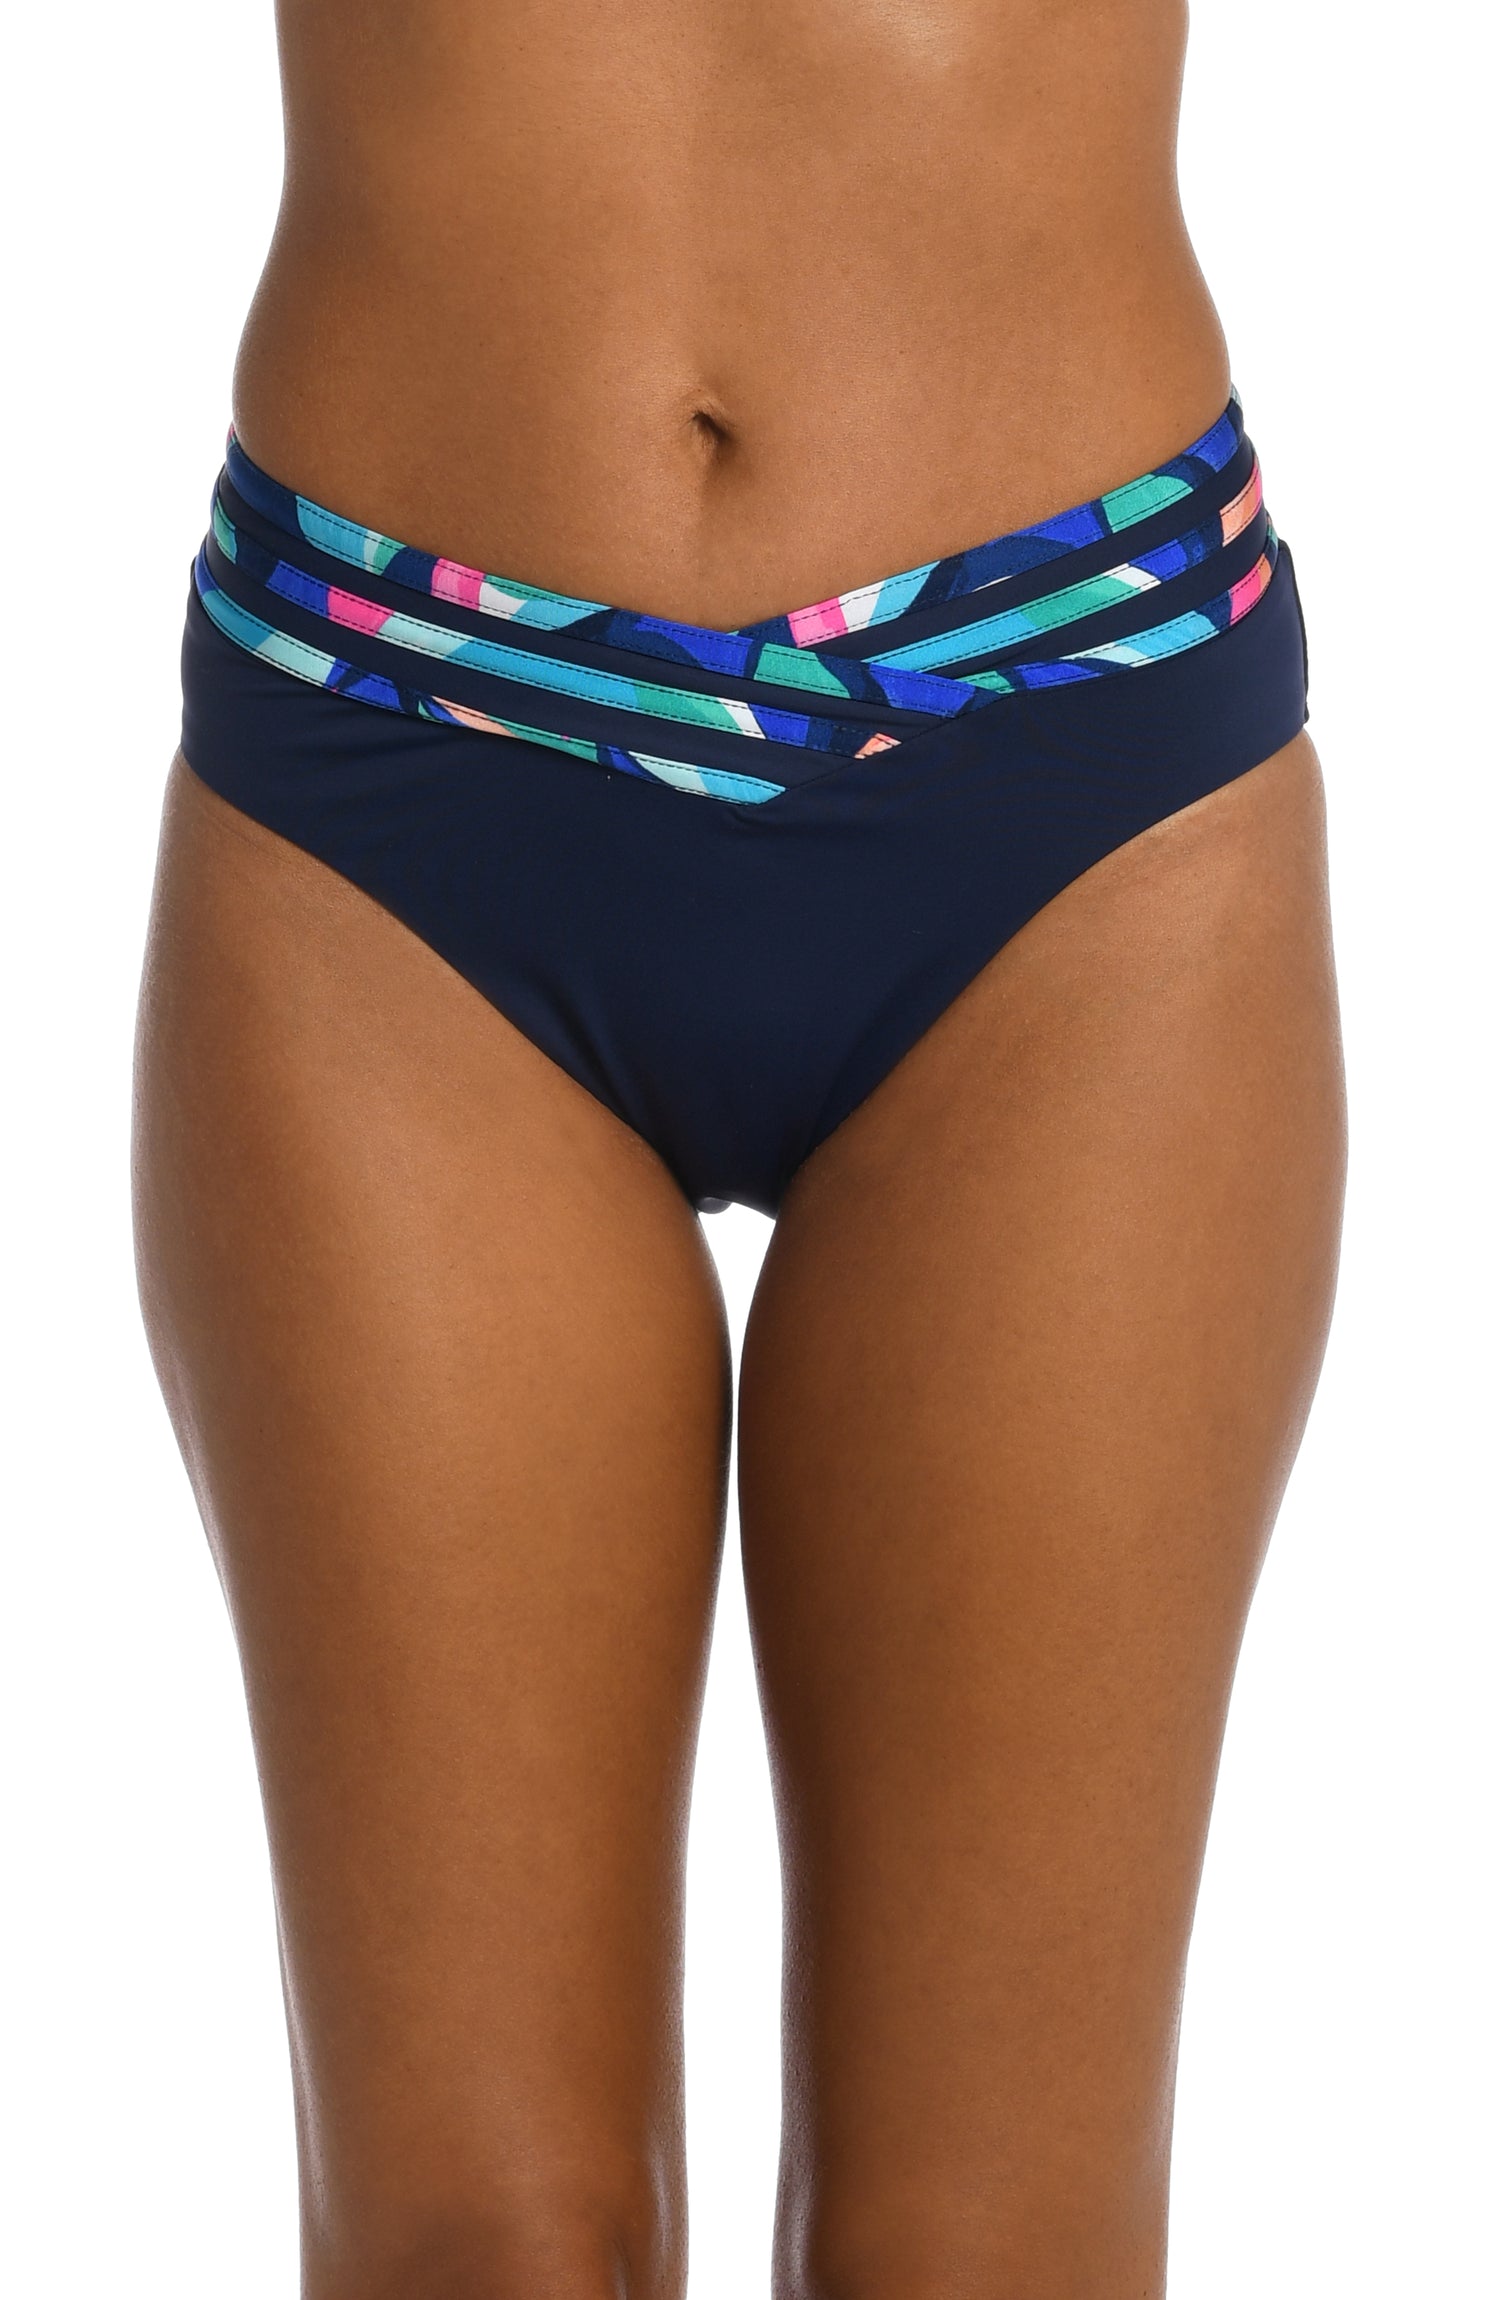 Model is wearing a bold paint-like stroke of vibrant dark colors printed on this crossover high waist bottom from our Painted Leaves collection!